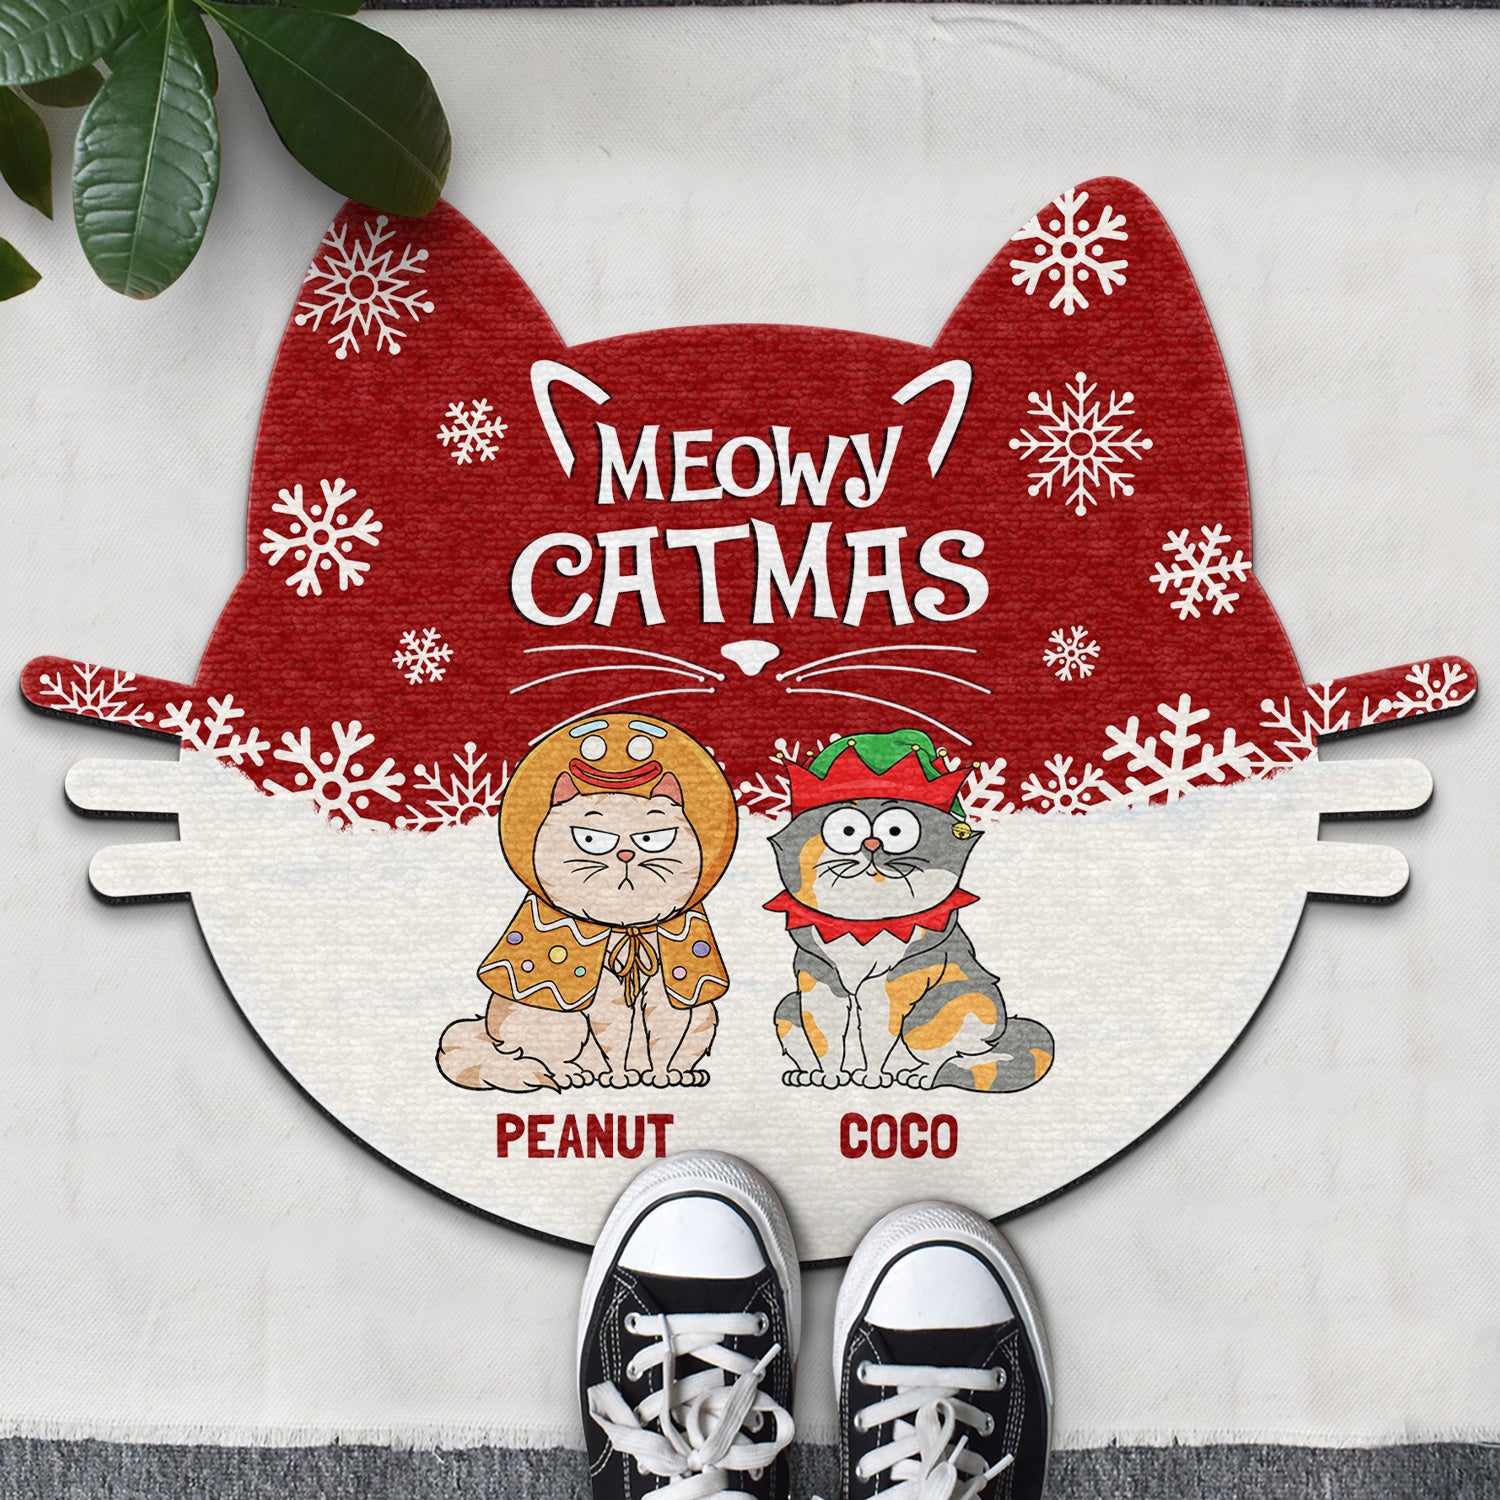 Meowy Catmas Funny Cartoon Cats - Christmas Gift For Cat Lovers - Personalized Custom Shaped Doormat